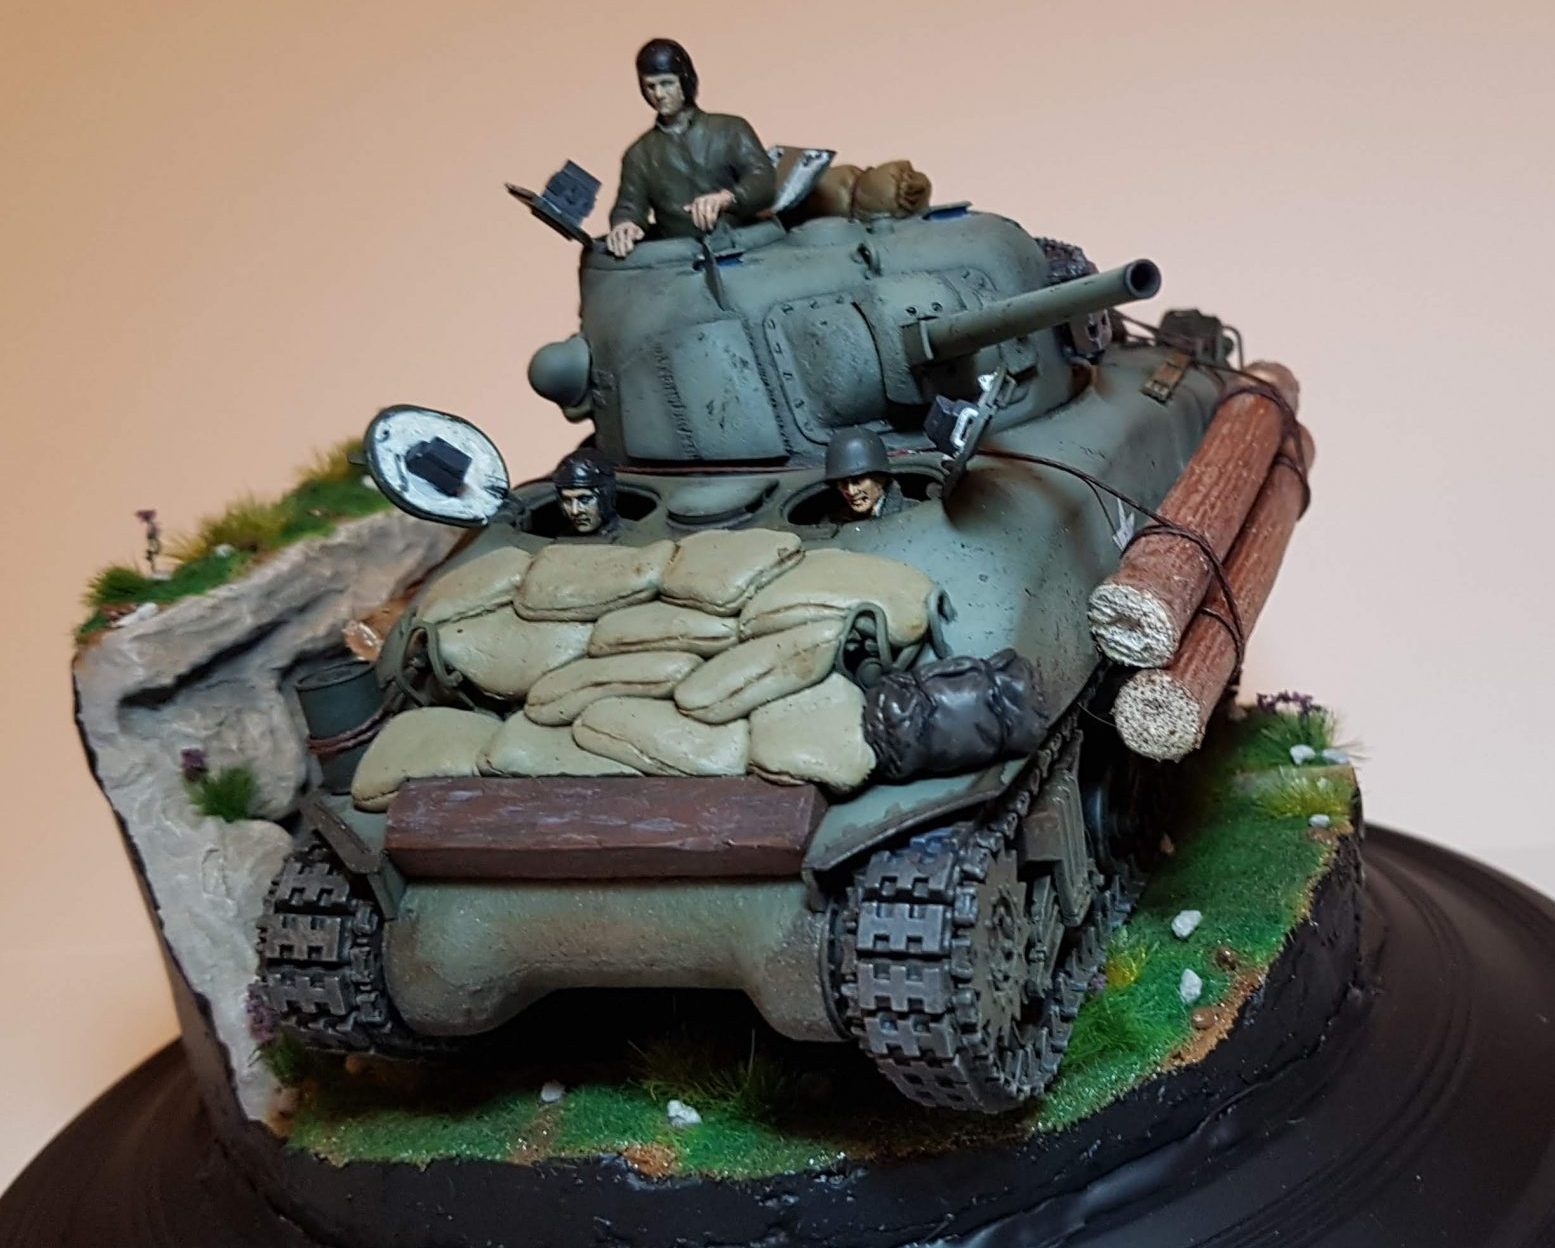 Kit-bashed - M4 Sherman (WW2) - Angle View 3 - 1/35 Scale - Built By Wright Built - Tamiya, Italeri, Formations, Others, Sculpted